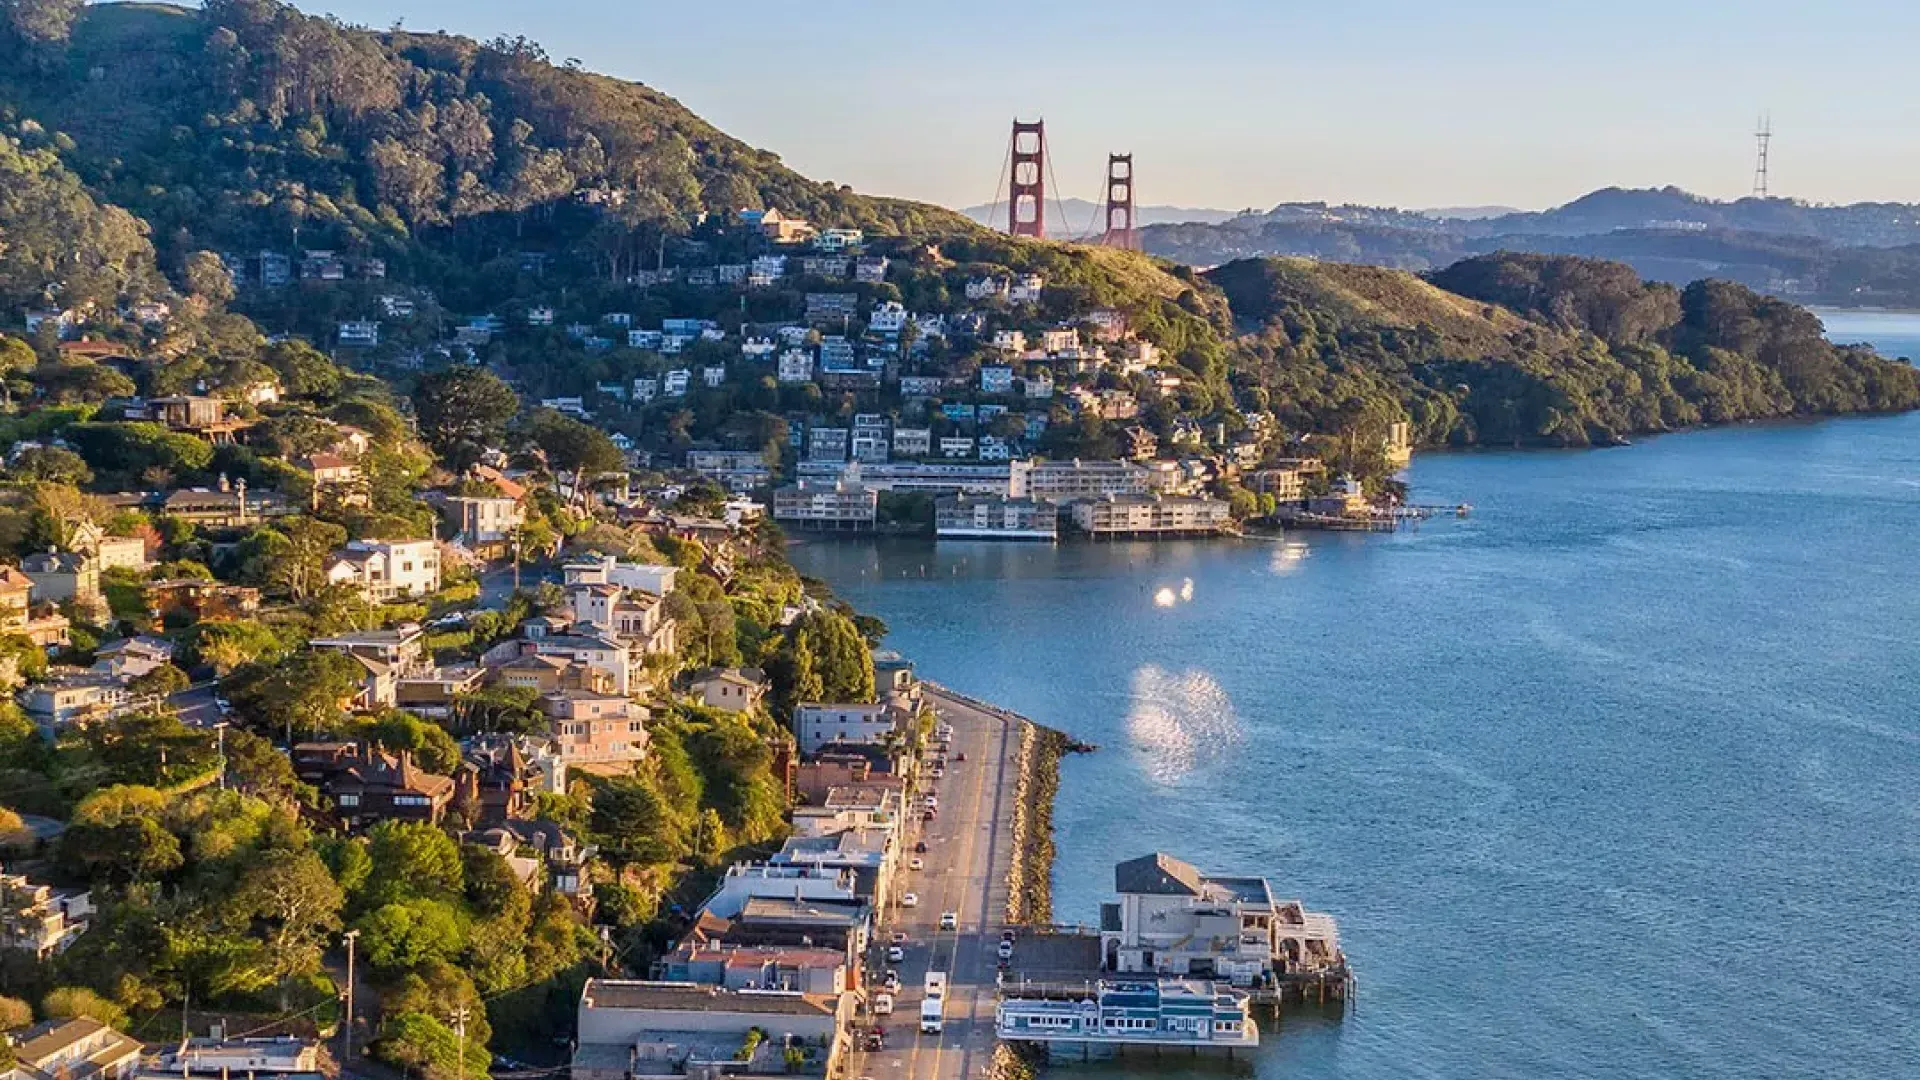 A bird's-eye view of Sausalito's waterfront.